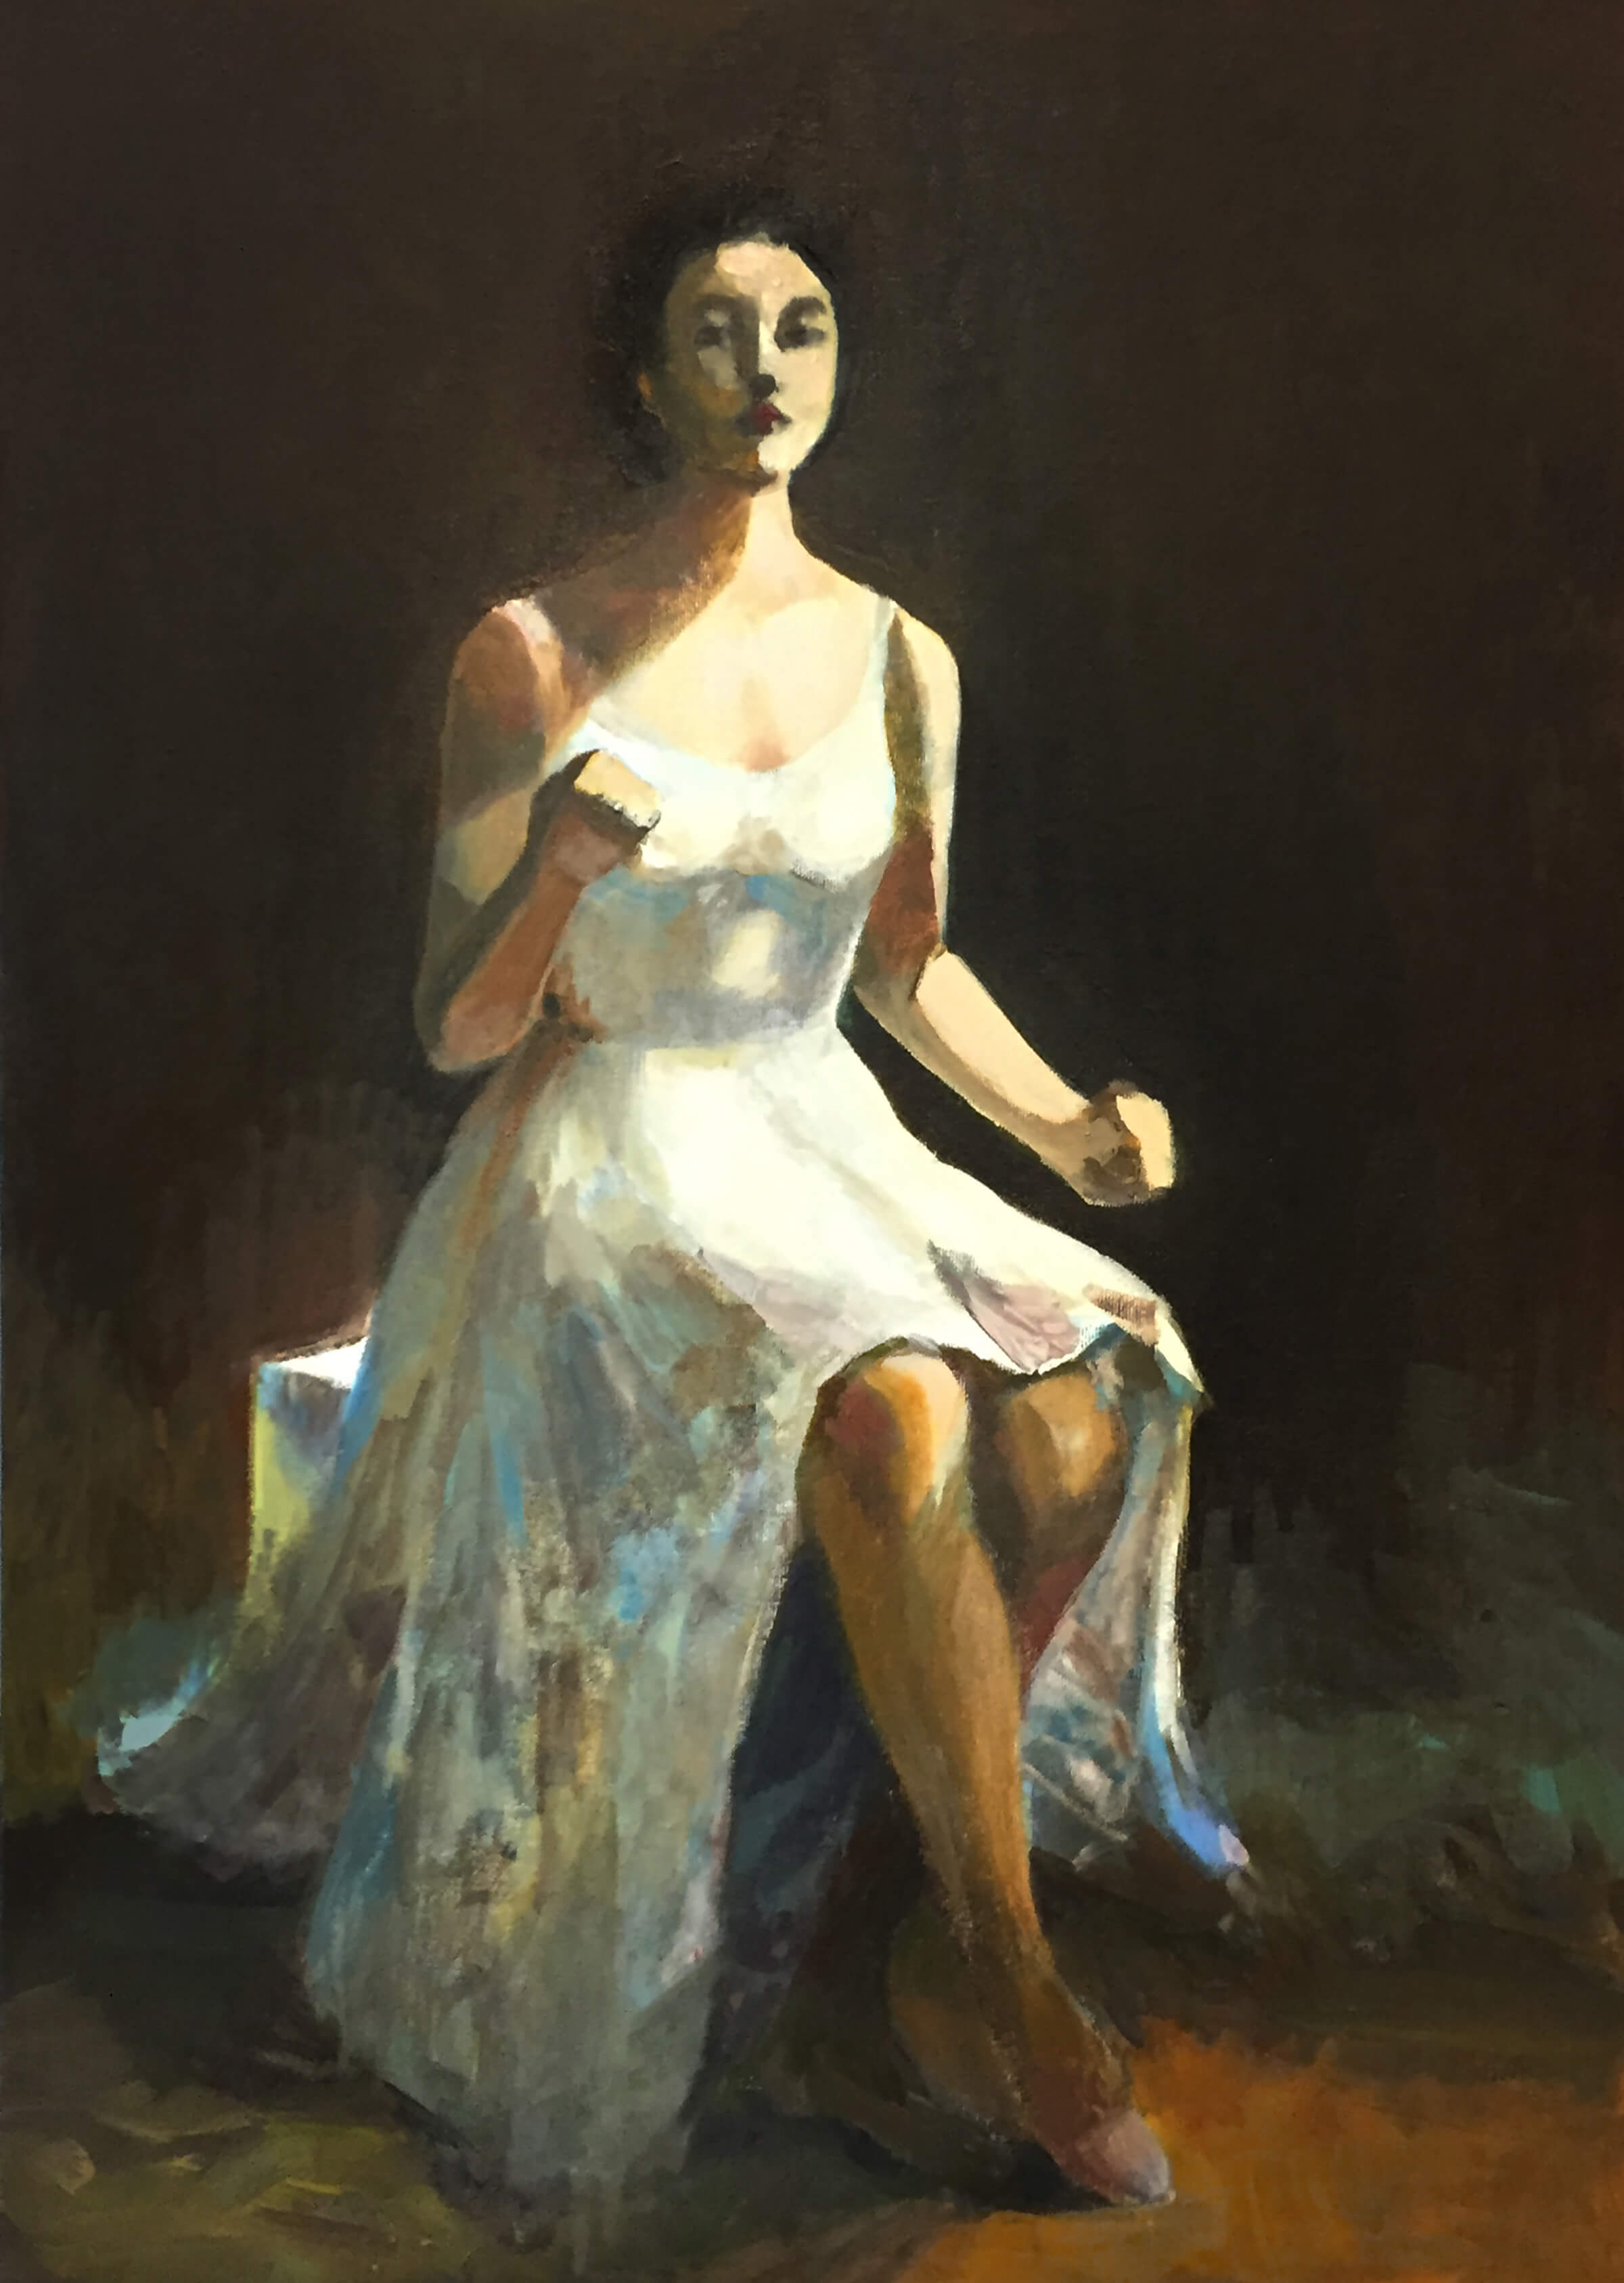 traditional painting of a dark-haired woman in a long white dress sitting on a box